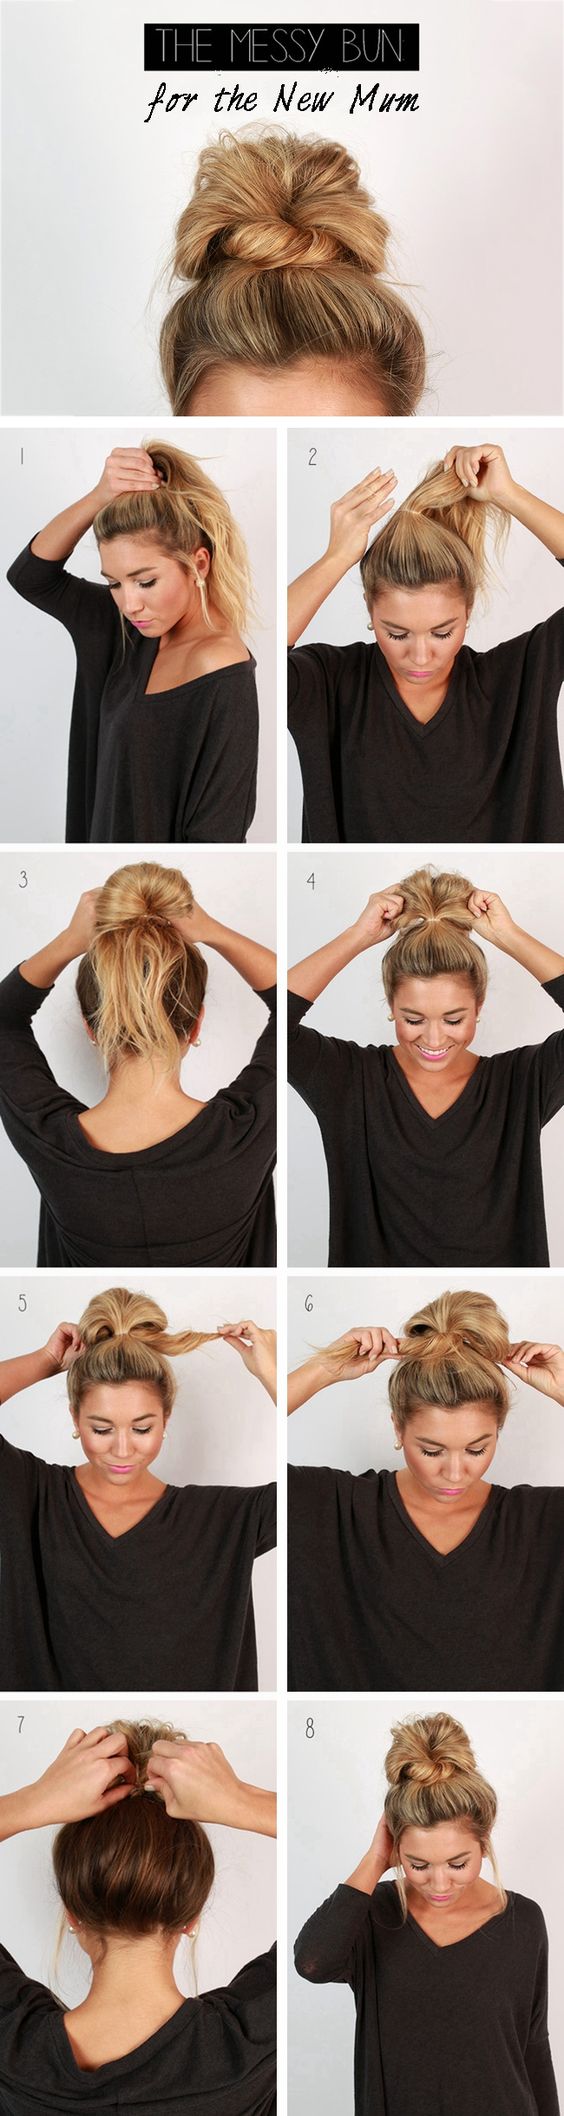 The messy bun for the new mum